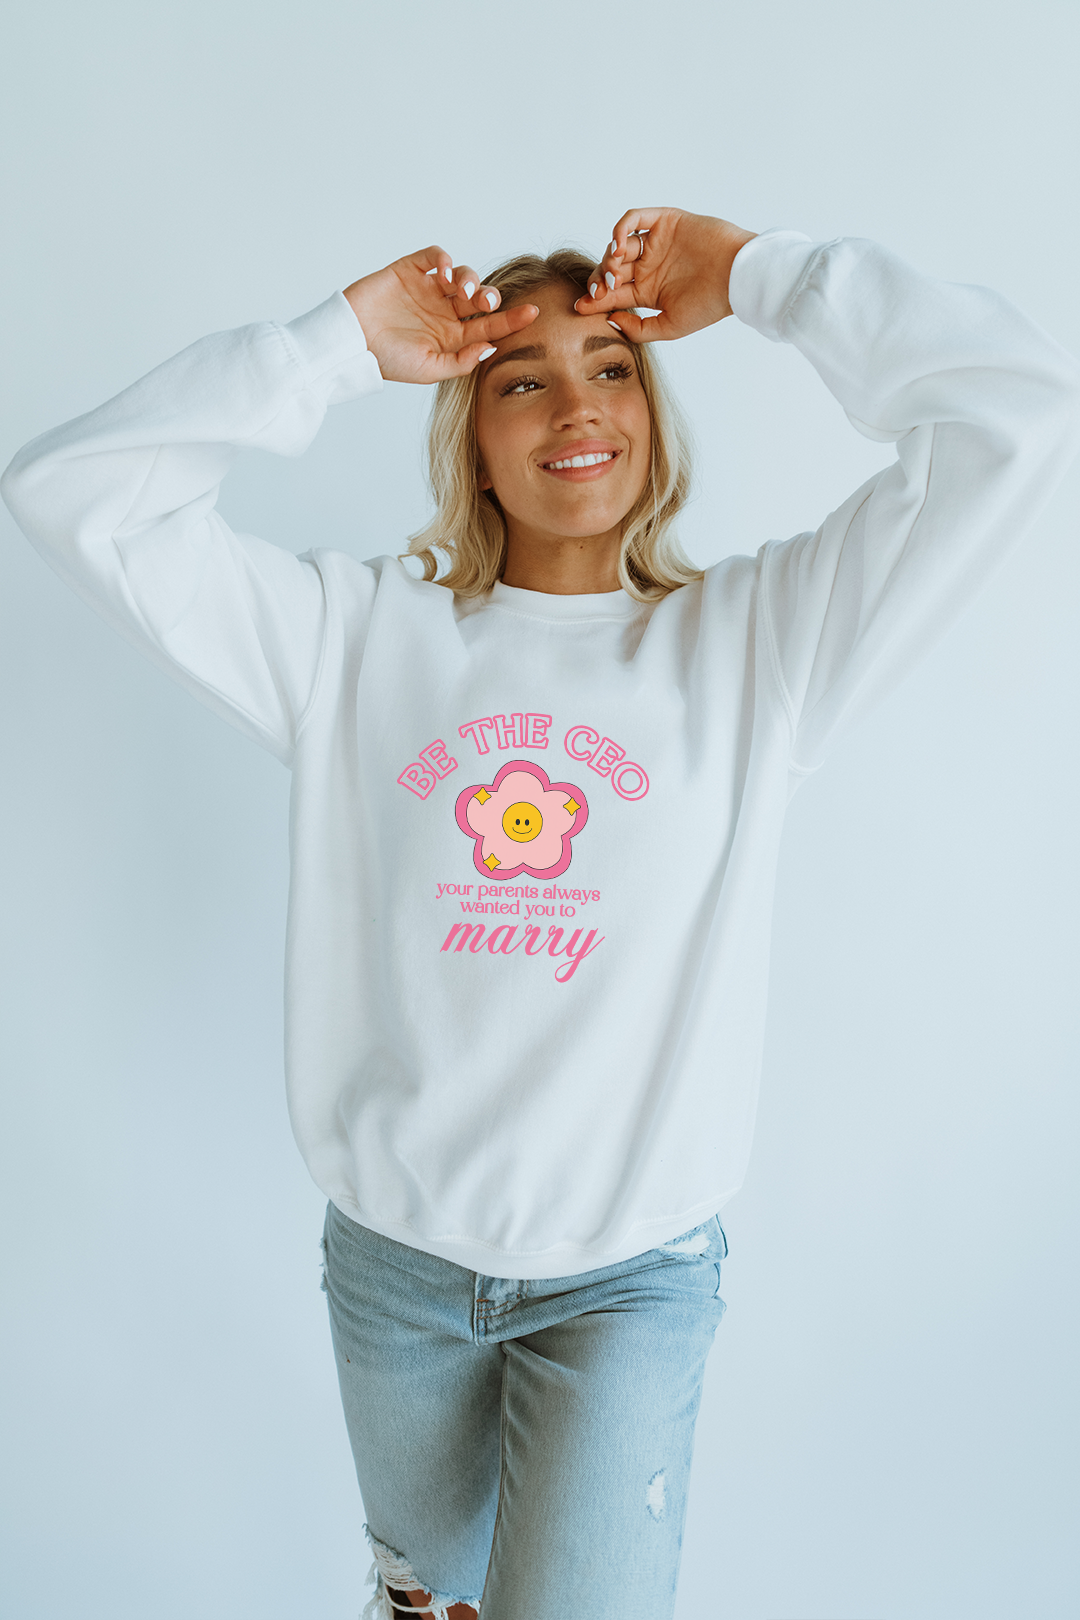 Be the CEO your parents always wanted you to Marry crewneck - White